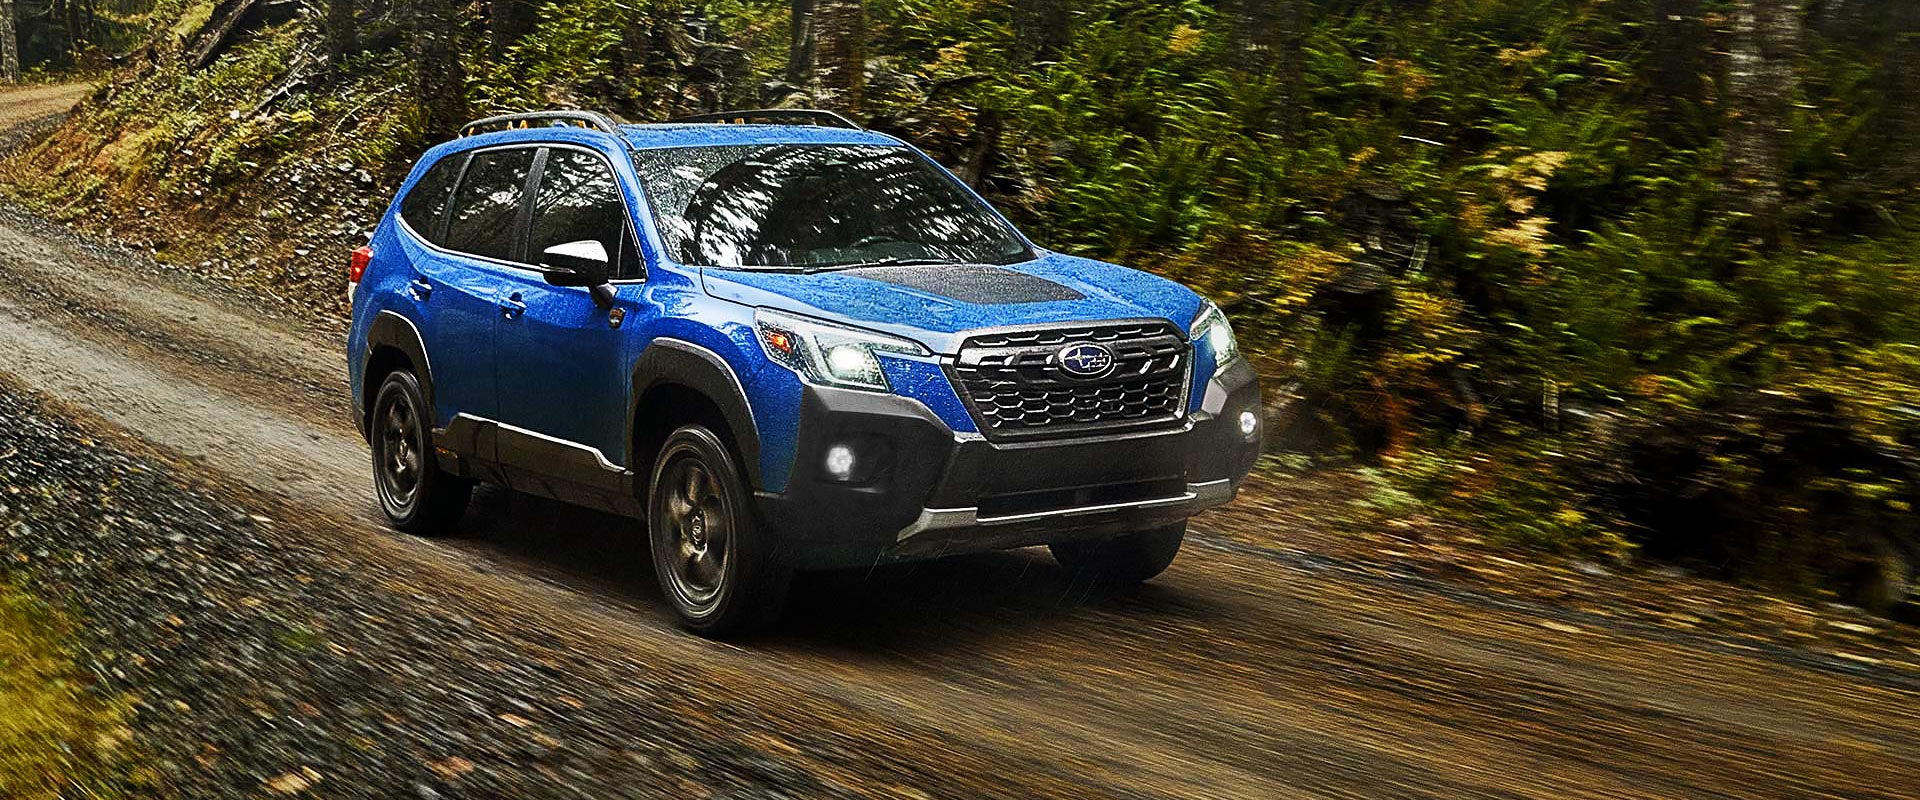 A 2022 Forester driving on a highway. | Dyer Subaru in Vero Beach FL